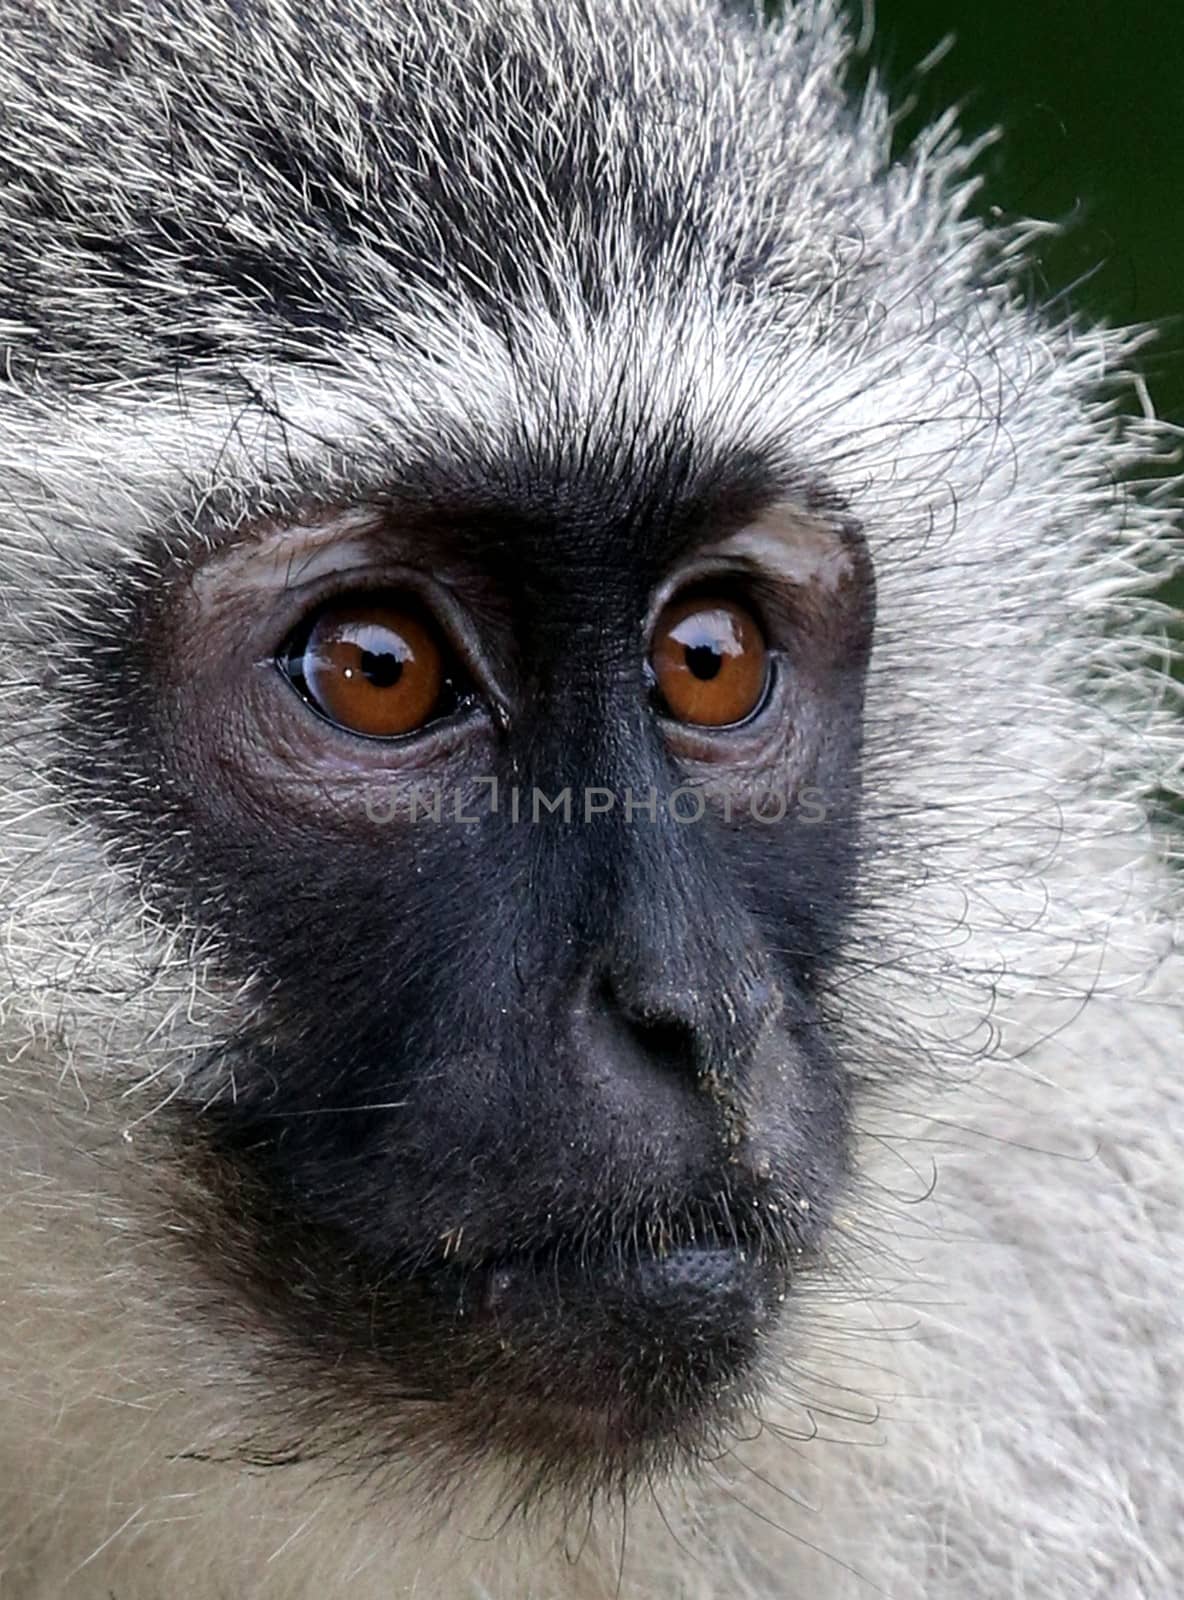 Portrait of a Vervet monkey from Africa